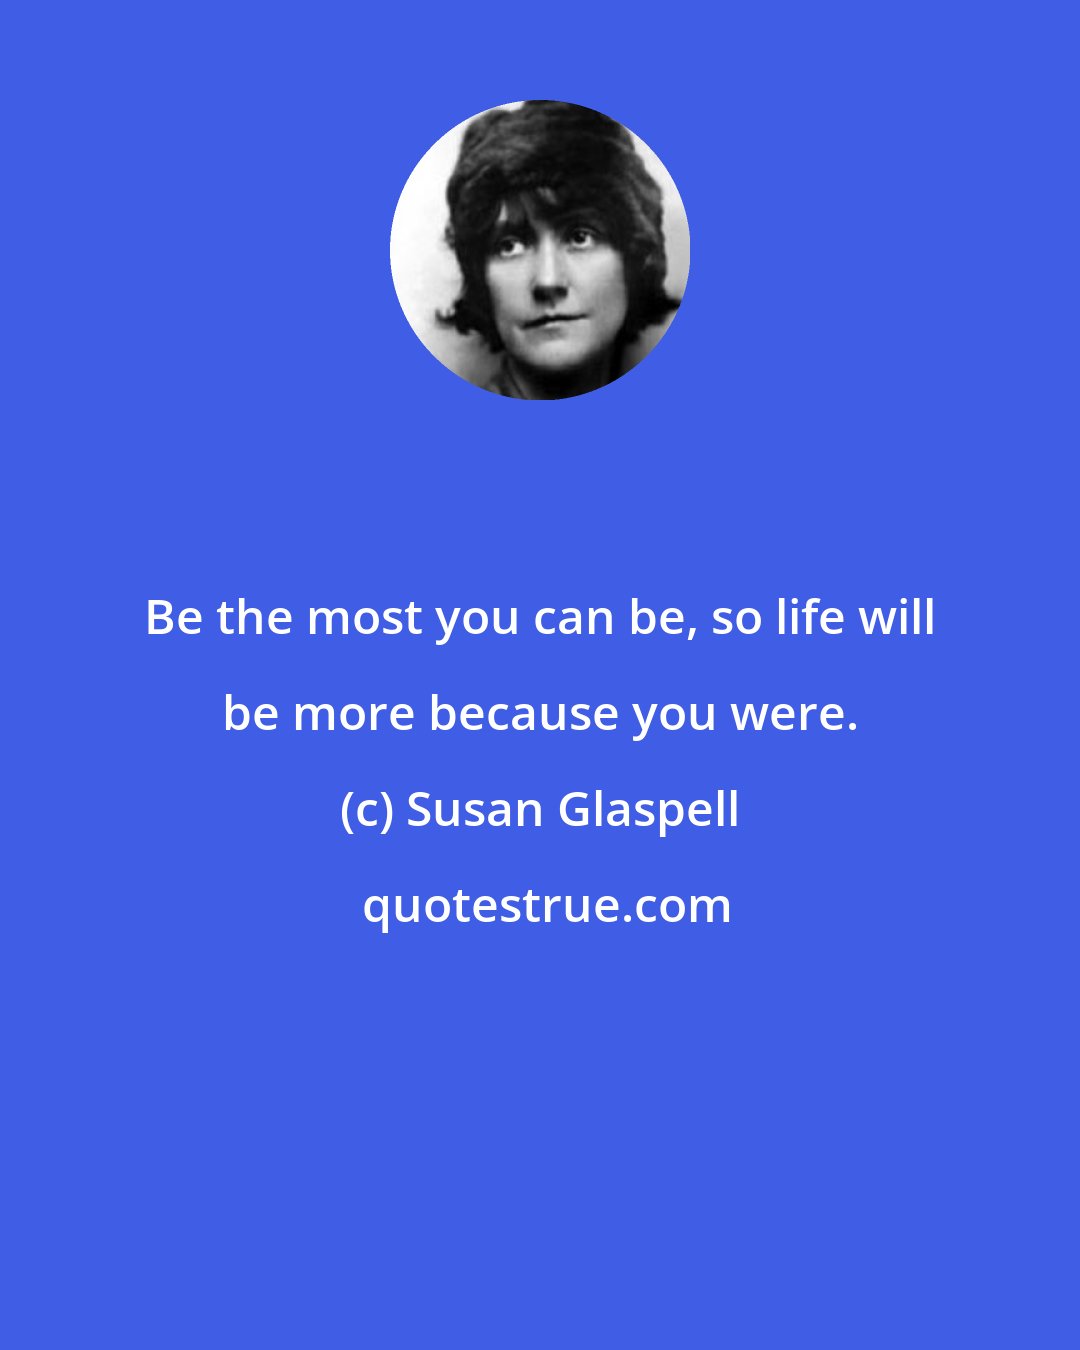 Susan Glaspell: Be the most you can be, so life will be more because you were.